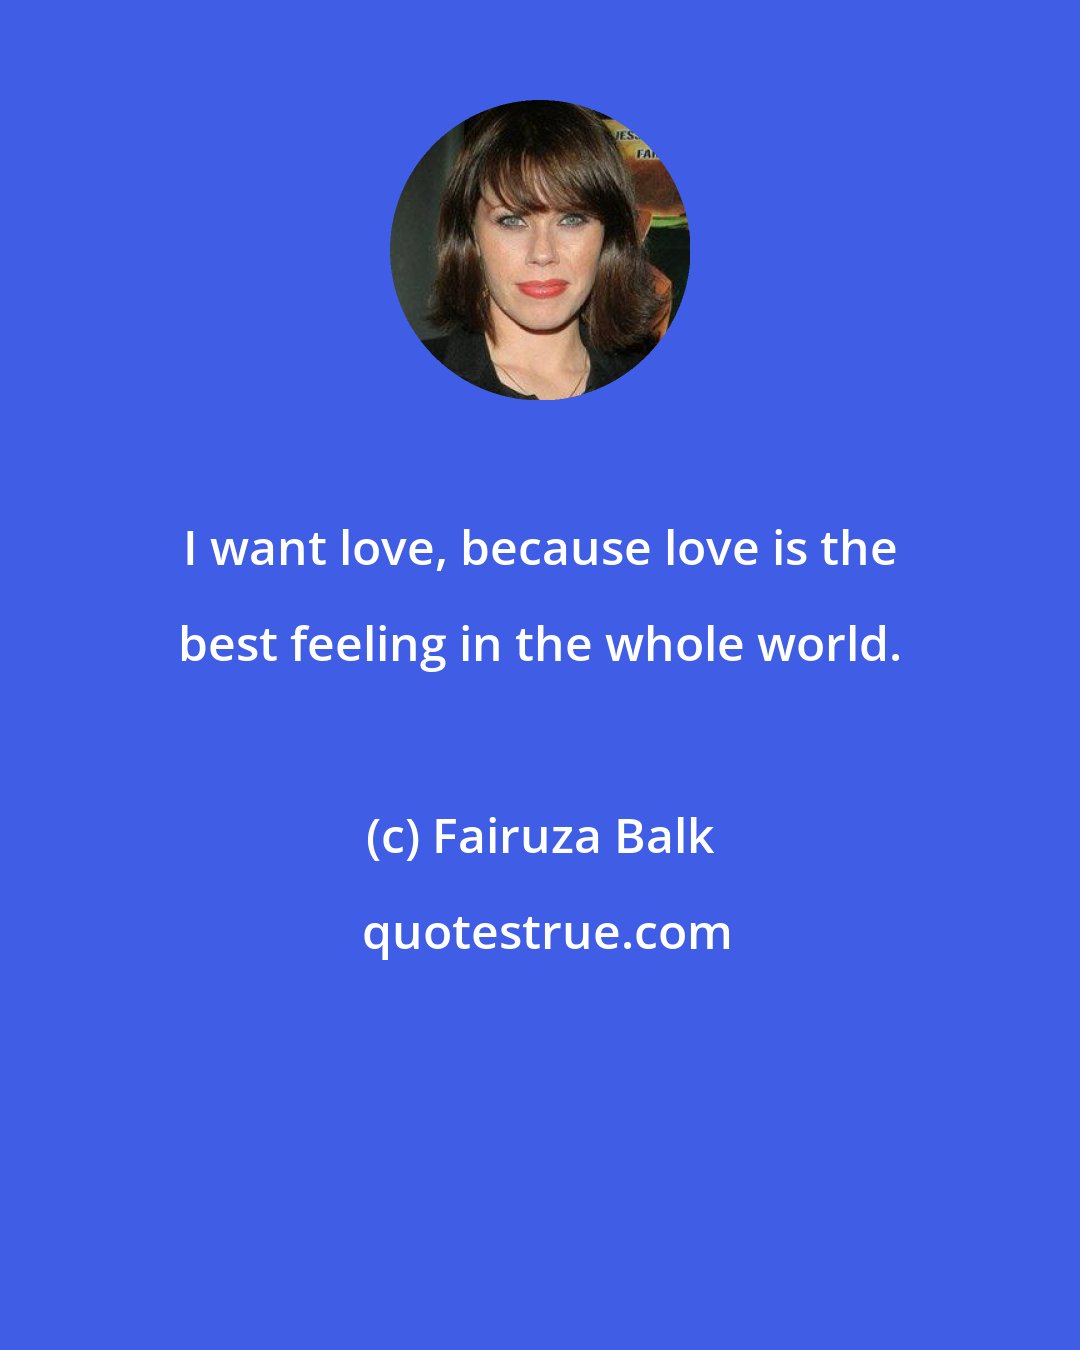 Fairuza Balk: I want love, because love is the best feeling in the whole world.